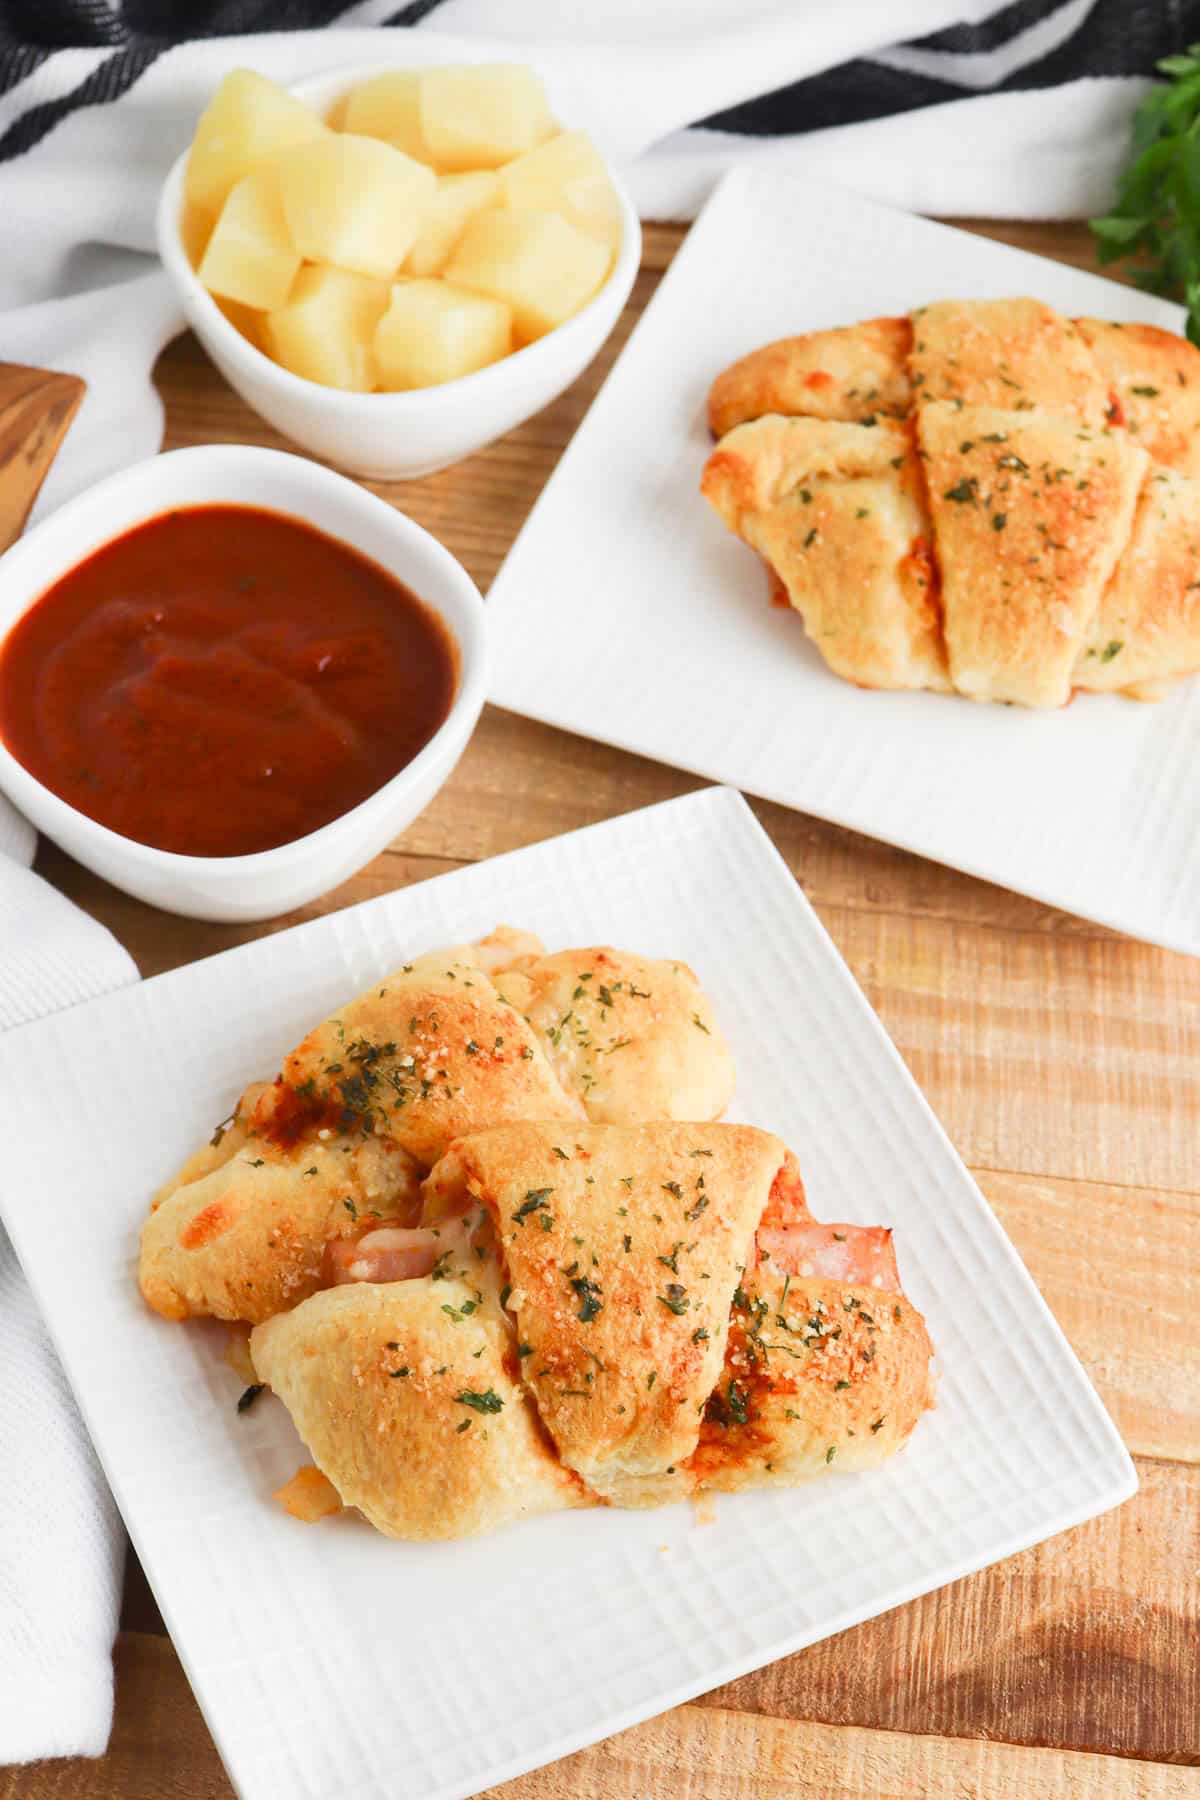 Ham and cheese crescent rolls with pineapple and pizza sauce.